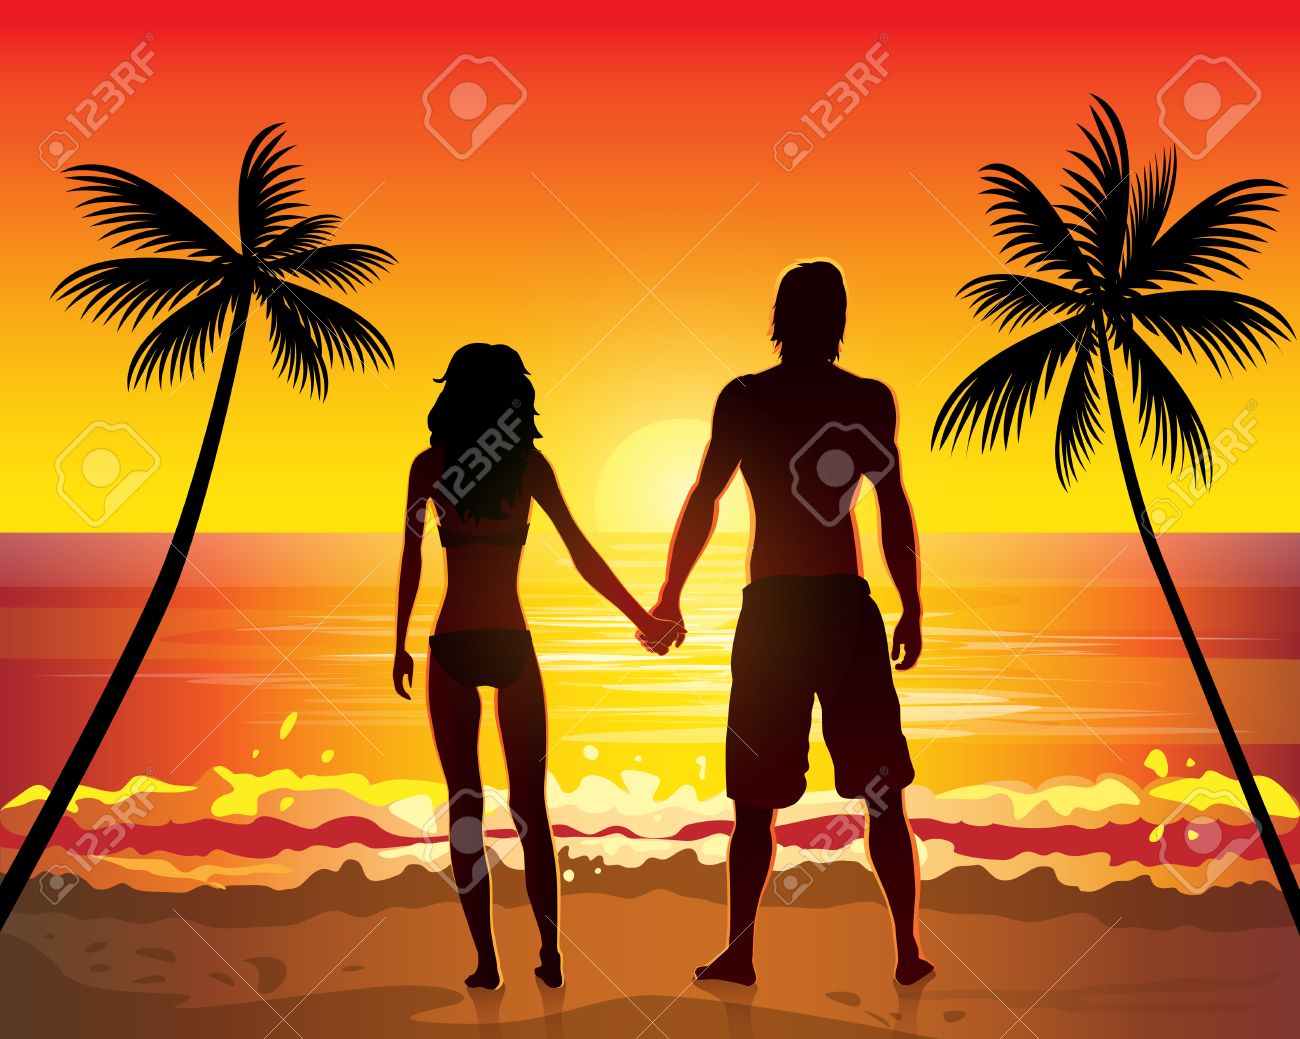 Romantic Couple Holding Hands On Beach Sunset Royalty Free.